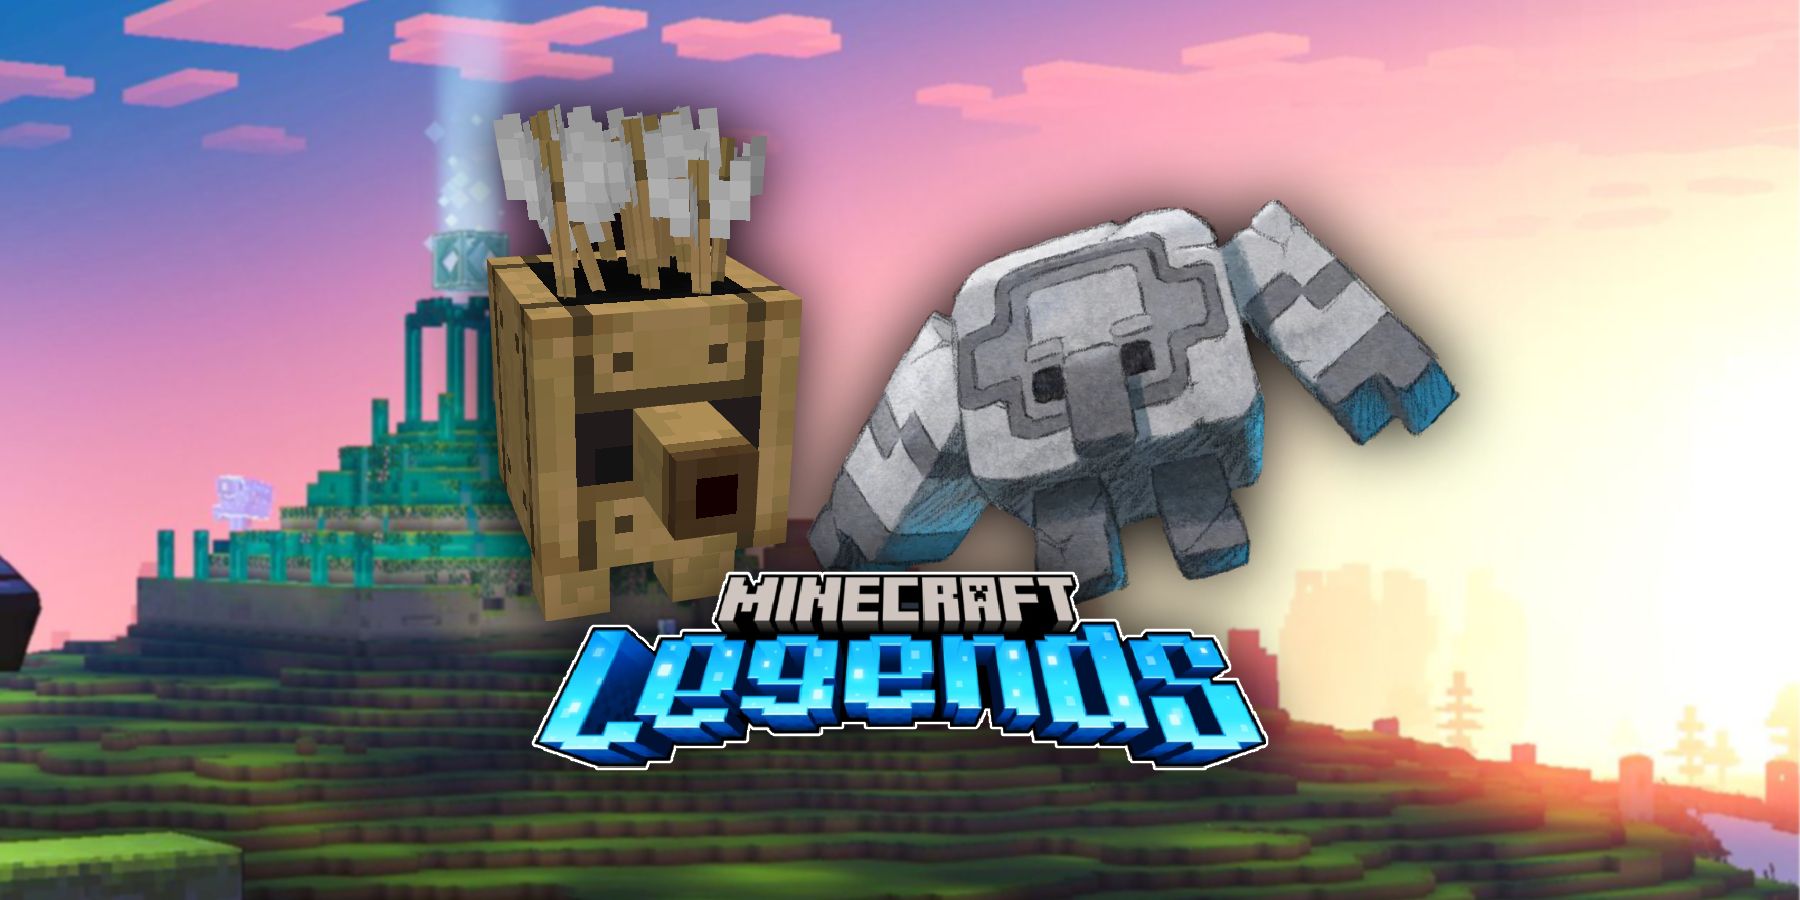 Is Minecraft Legends on mobile?